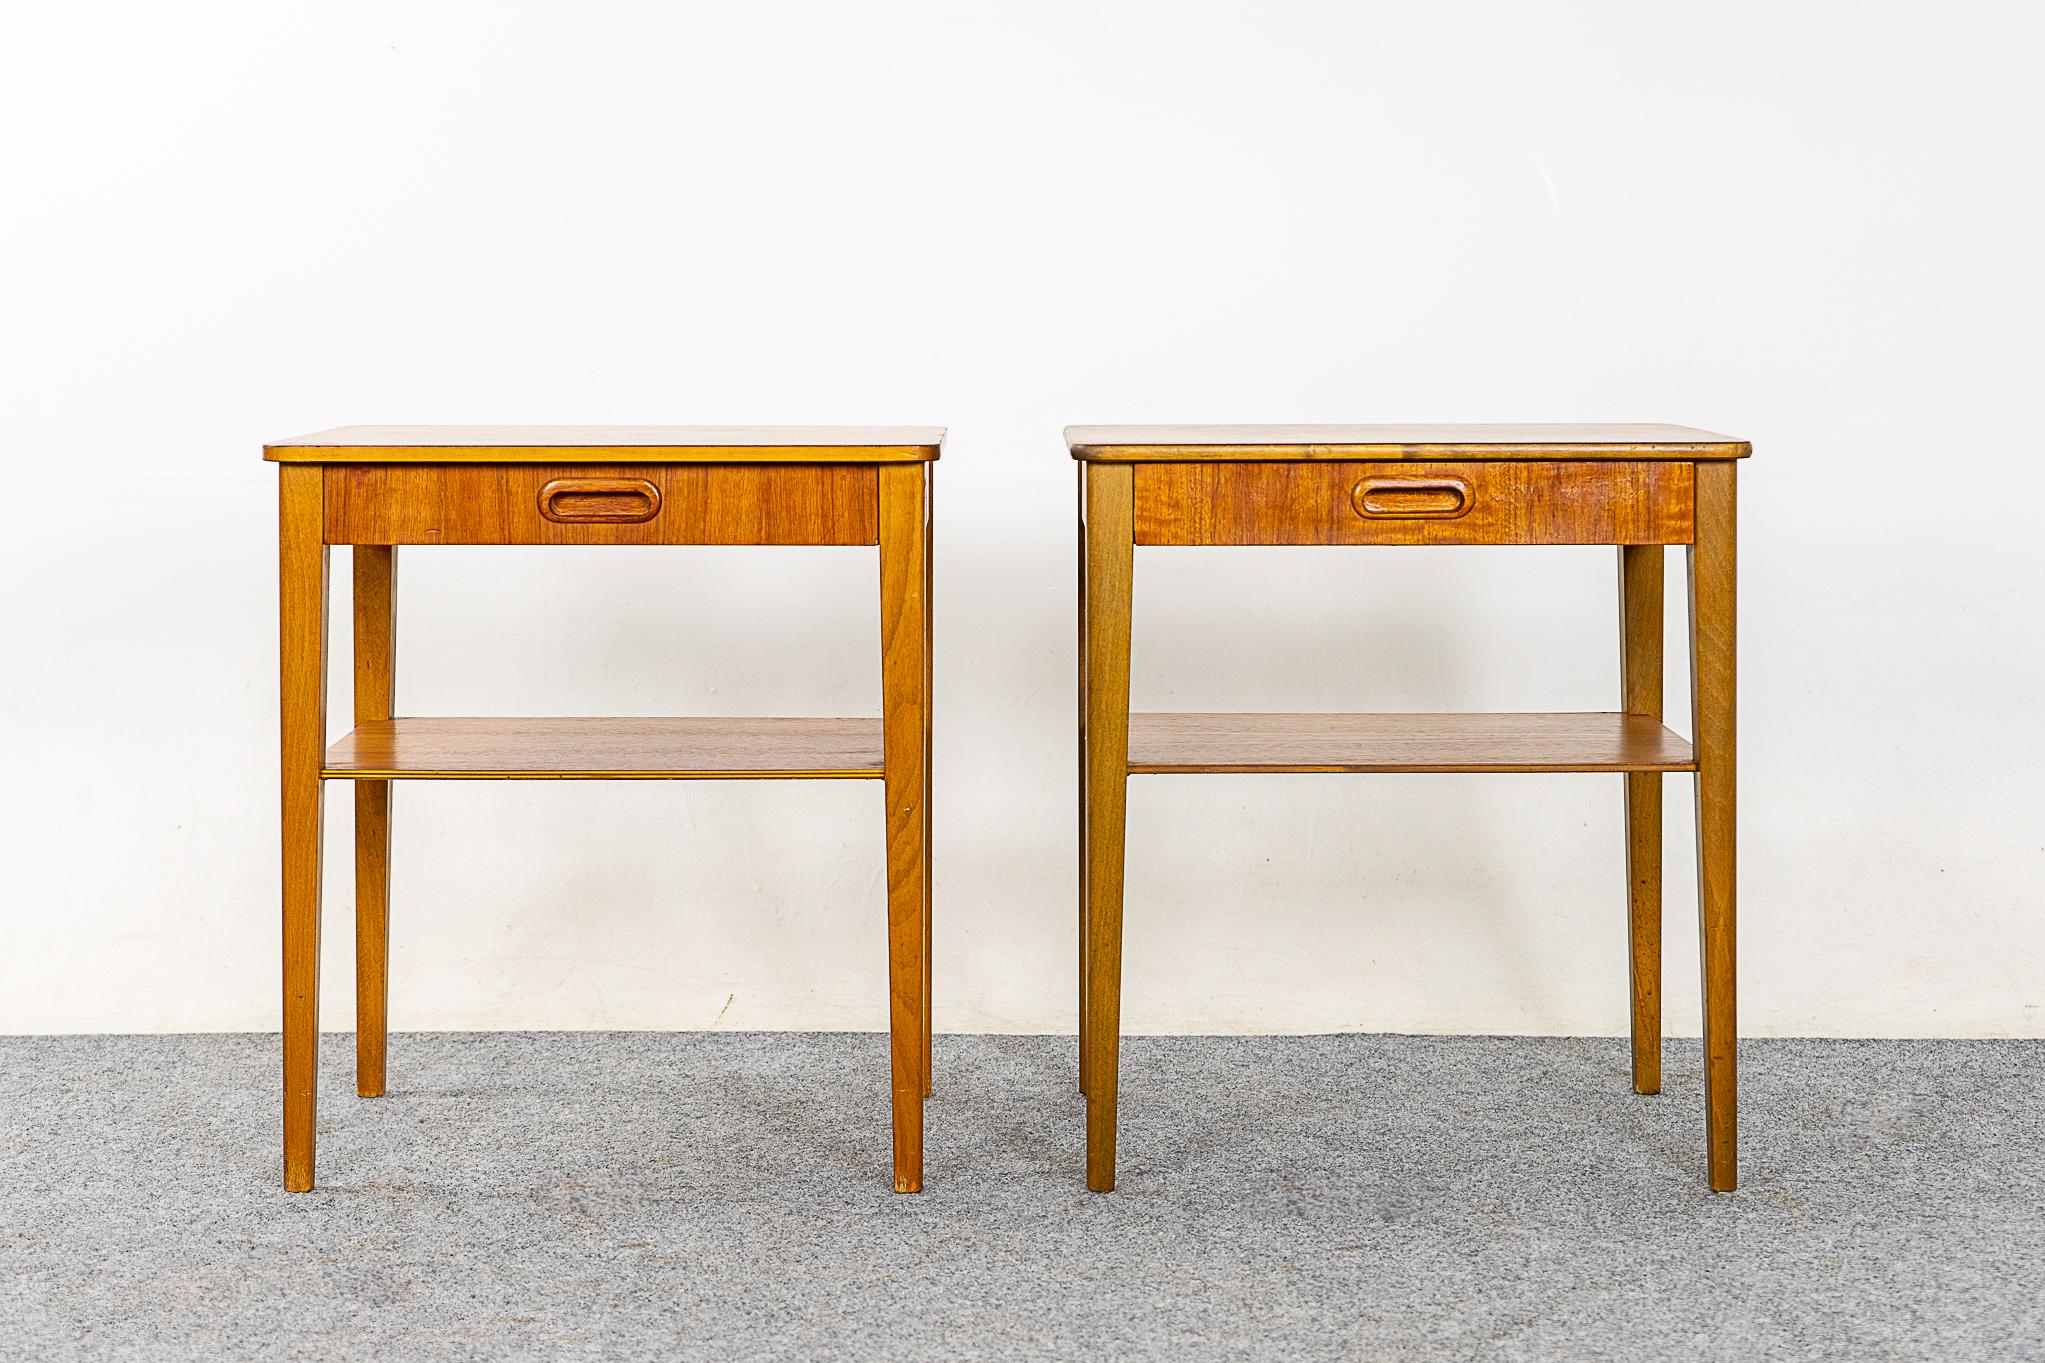 Teak & beechwood bedside table pair, circa 1960s. Beautifully veneered case rests on slender, tapered legs. Dovetailed drawer offers storage for small items, and the lower shelf is perfect for your favorite book. Simple, elegant!

Unrestored item,